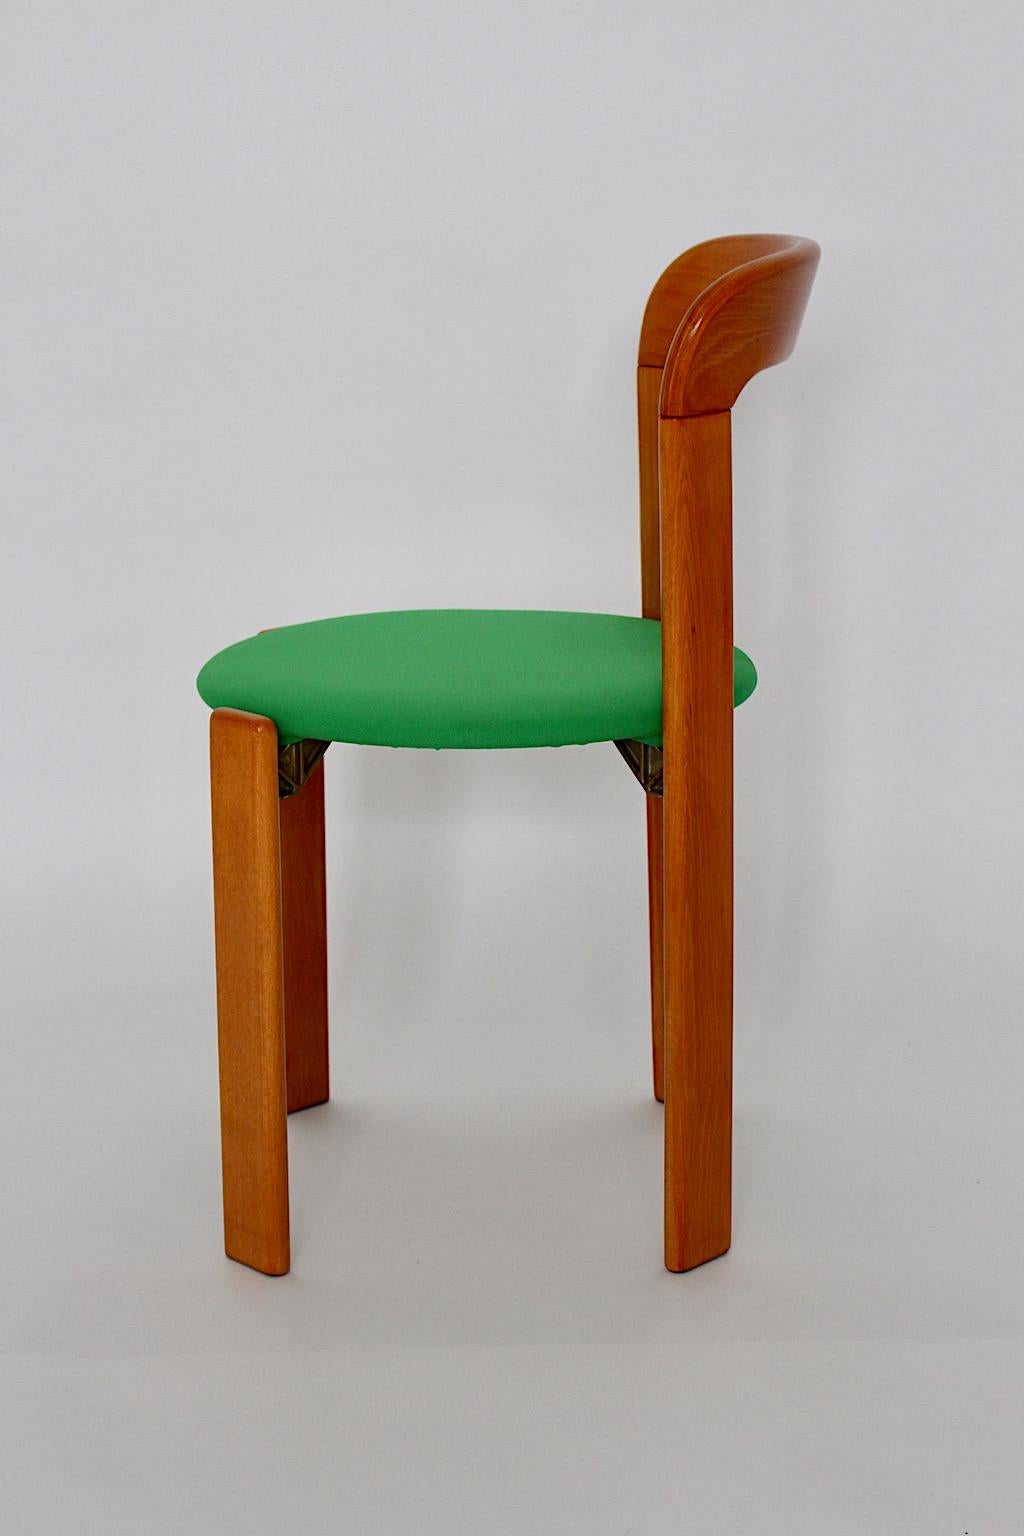 Swiss Bruno Rey Vintage Six Beech and Green Upholstery Dining Chairs 1970s Switzerland